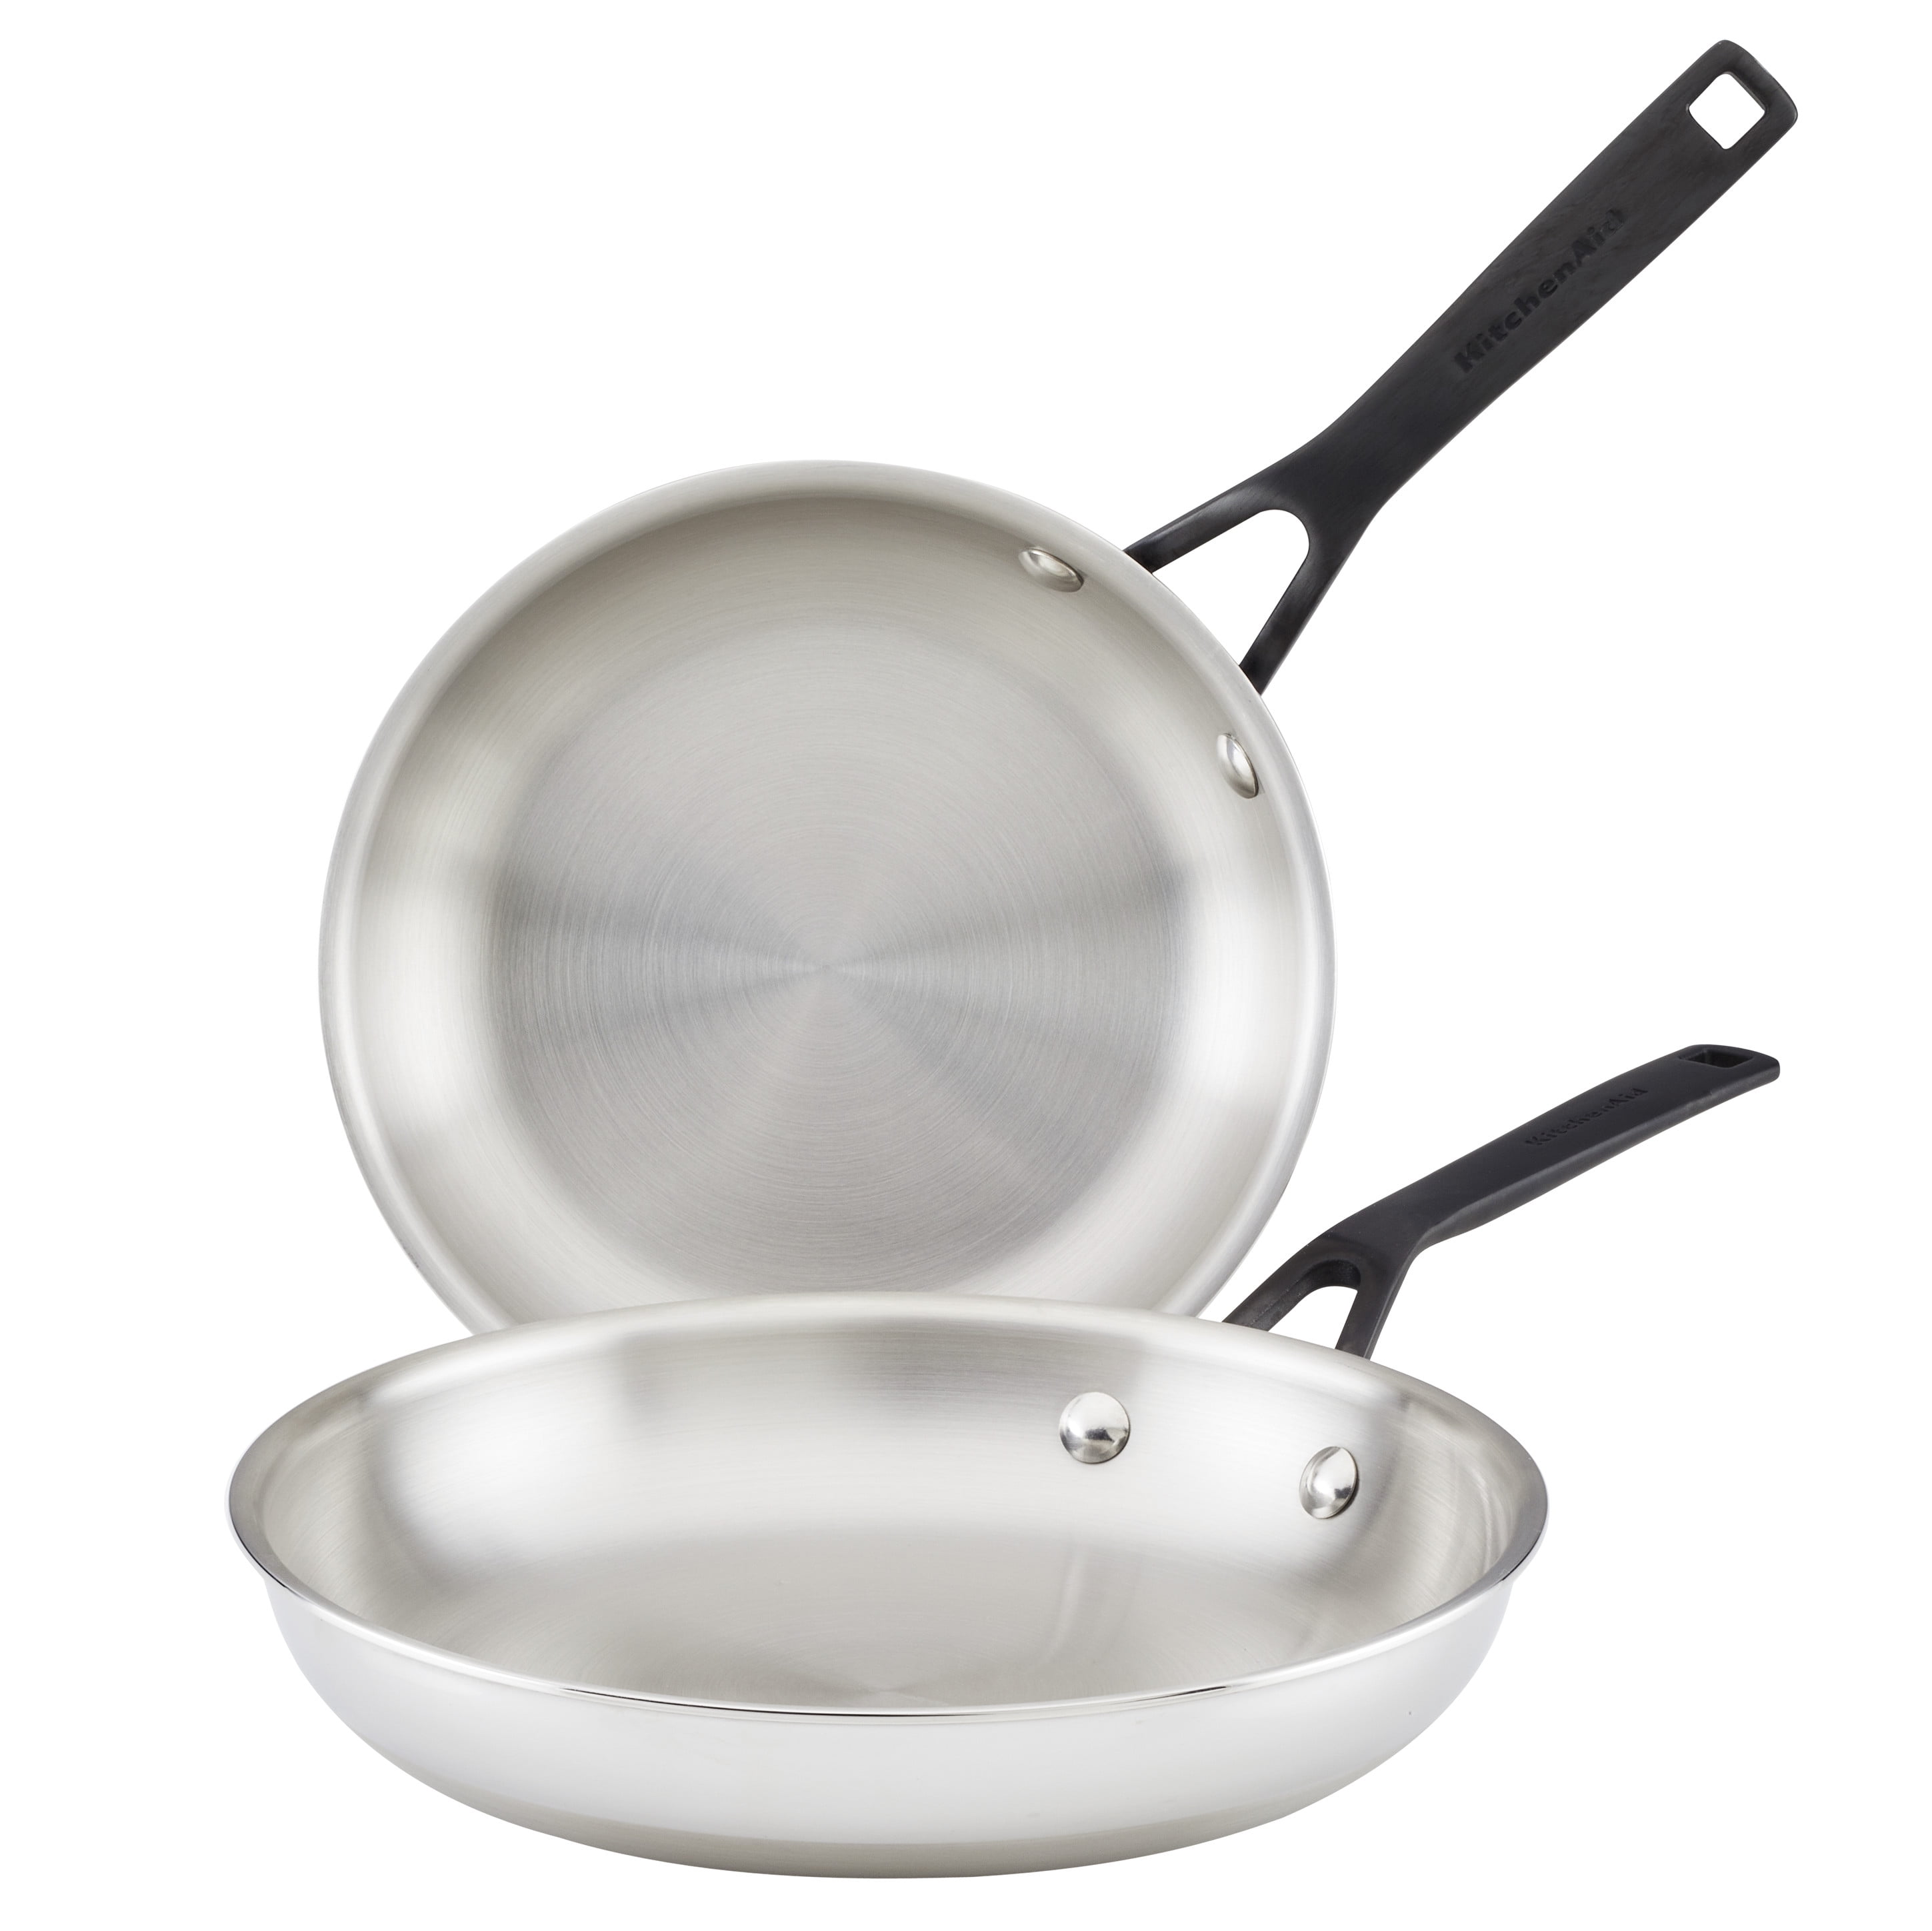 KitchenAid 5-Ply Clad Stainless Steel Induction Frying Pan Set · 2 Piece Set